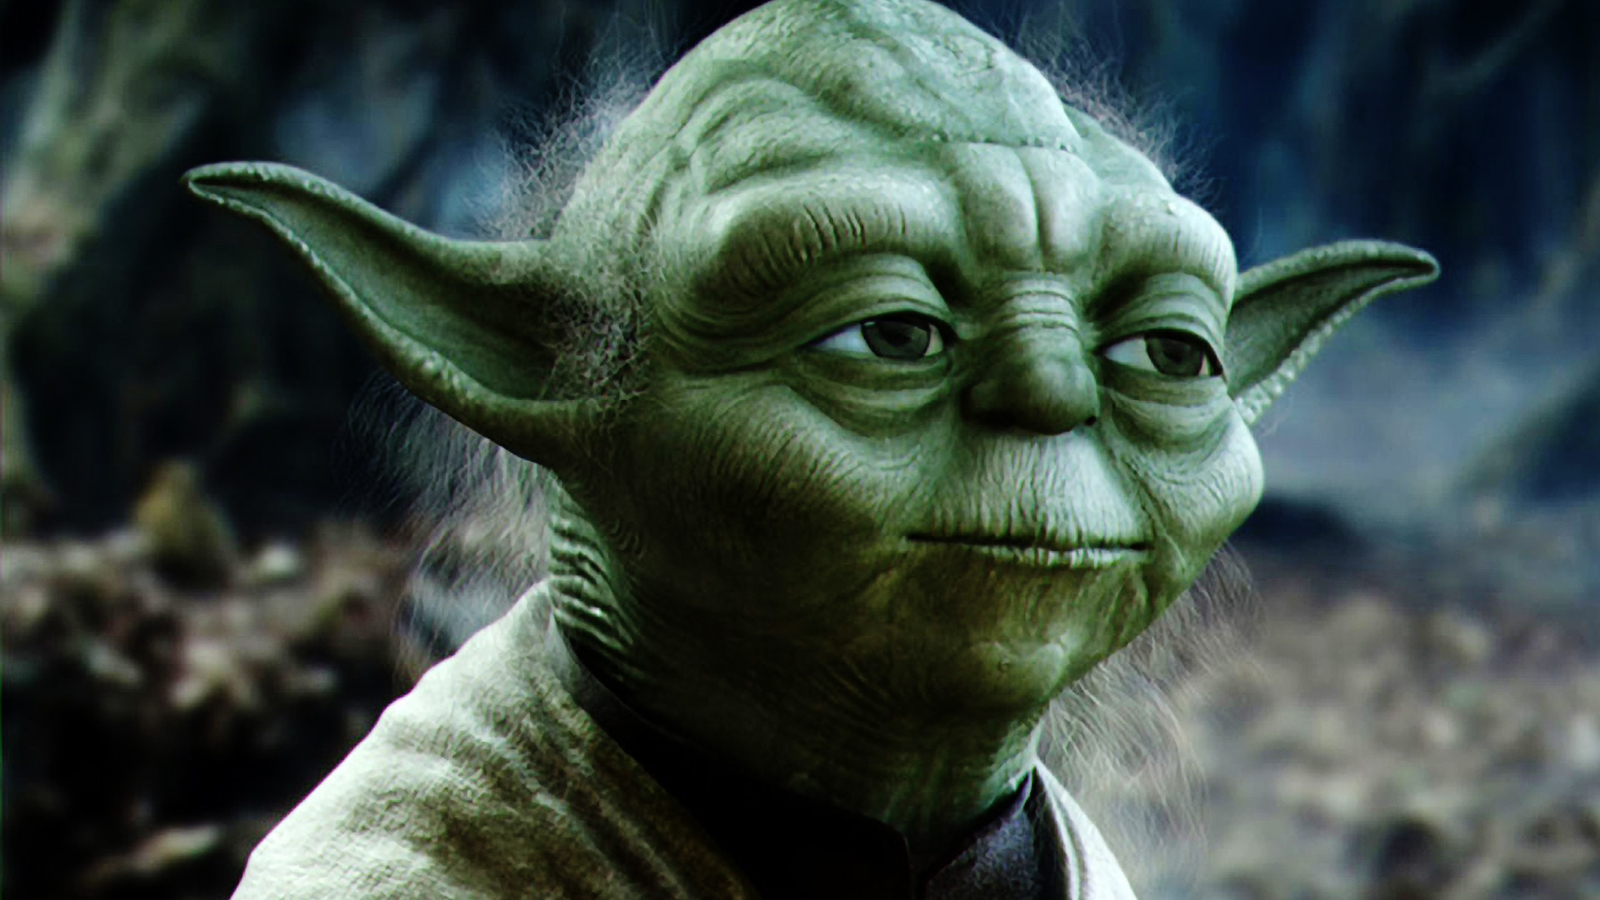 Master Yoda Star Wars HD Wallpapers Download Free Wallpapers in HD for